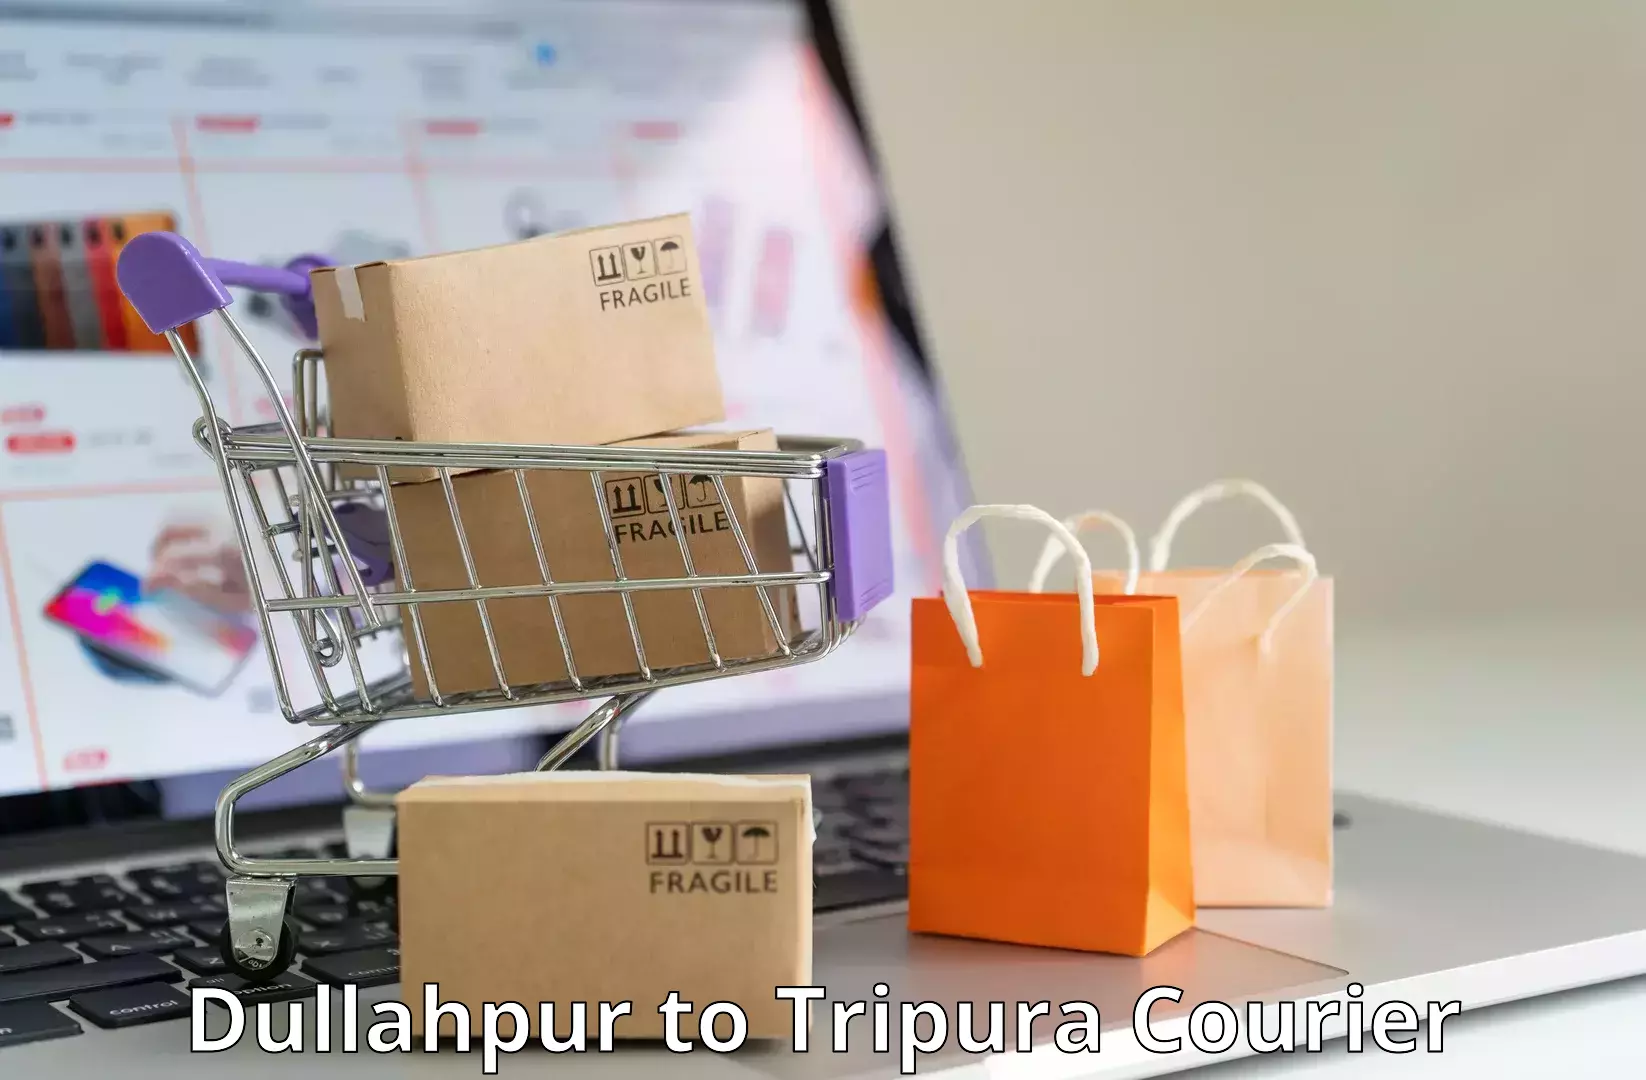 Flexible delivery scheduling Dullahpur to Udaipur Tripura